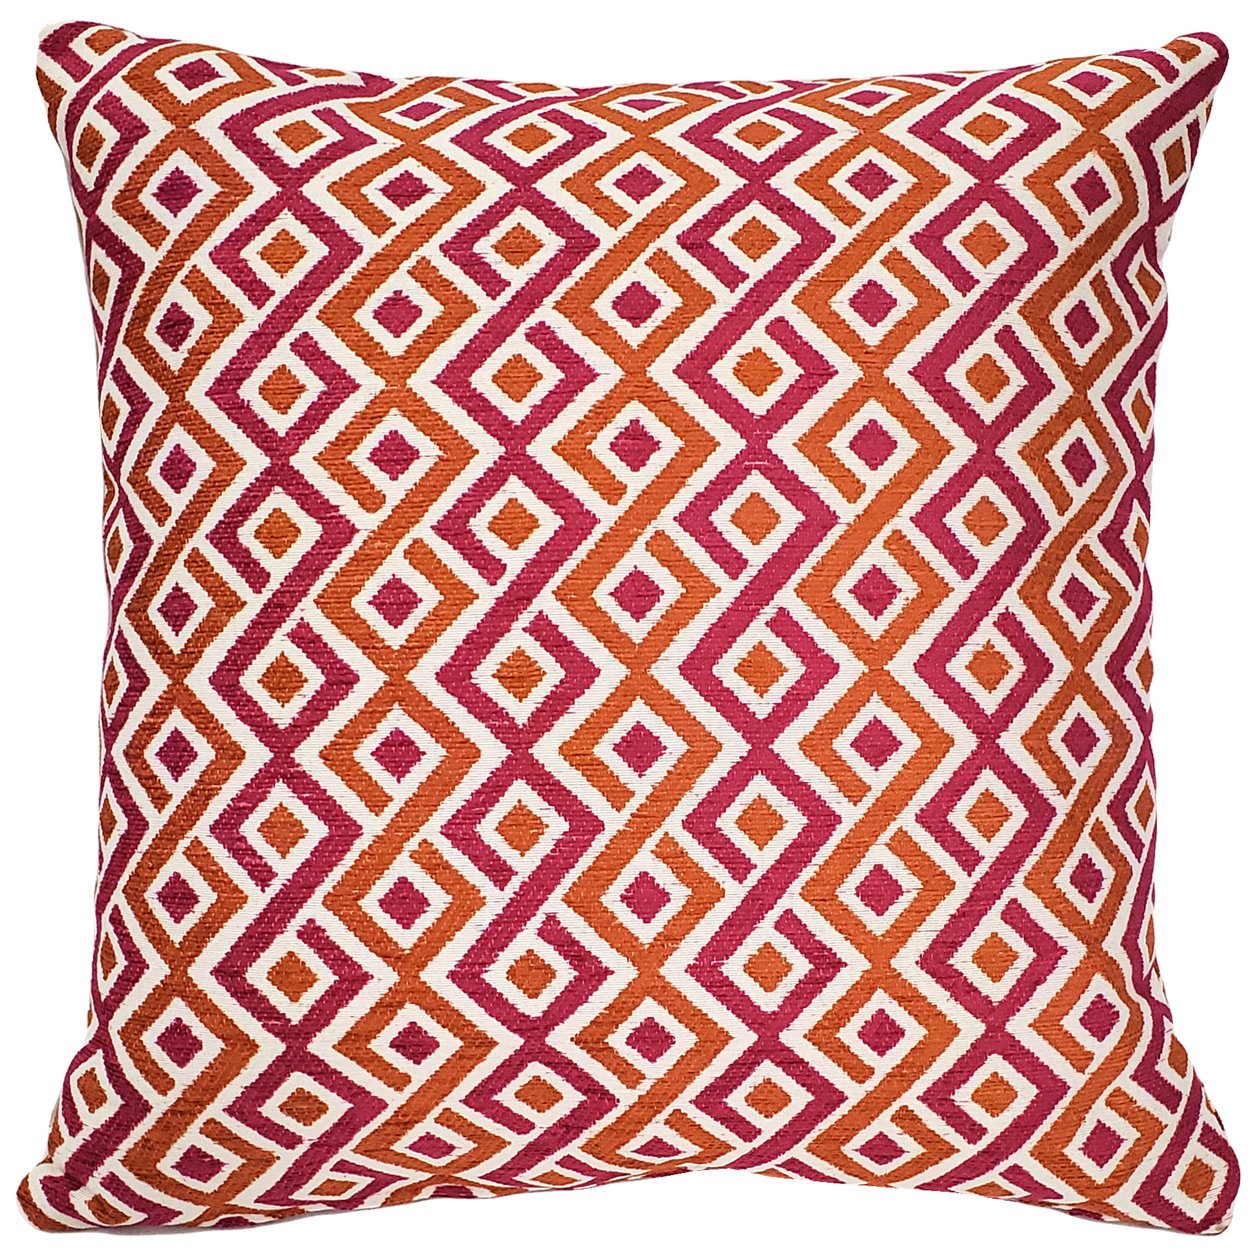 Follow Me Fiesta Pink And Orange Throw Pillow 19x19, With Polyfill Insert